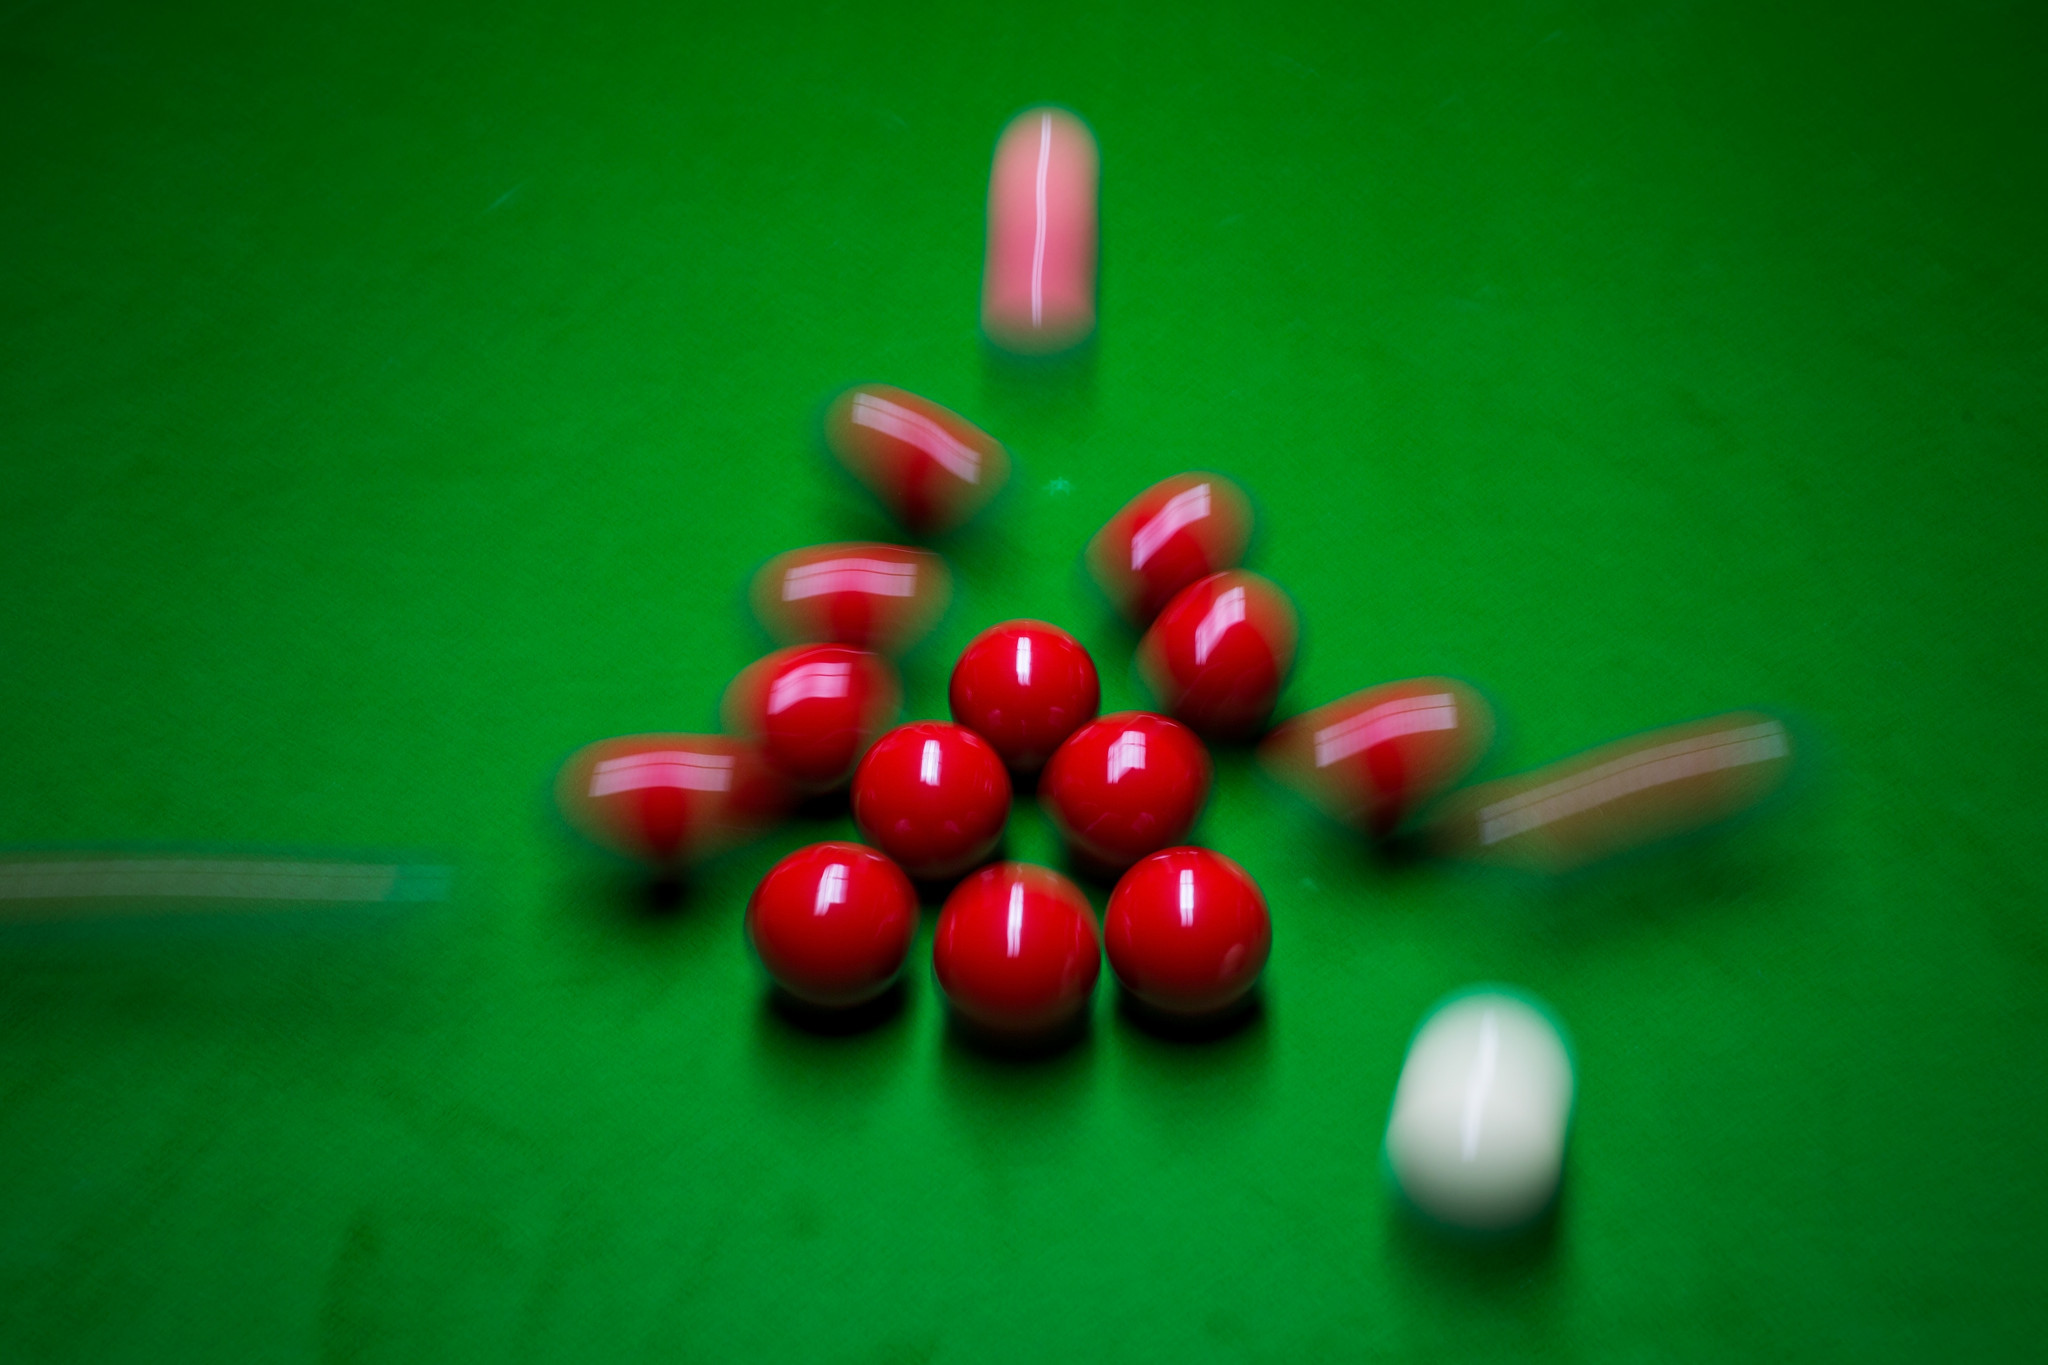 Qualifiers for re-arranged World Snooker Championship to take place next month